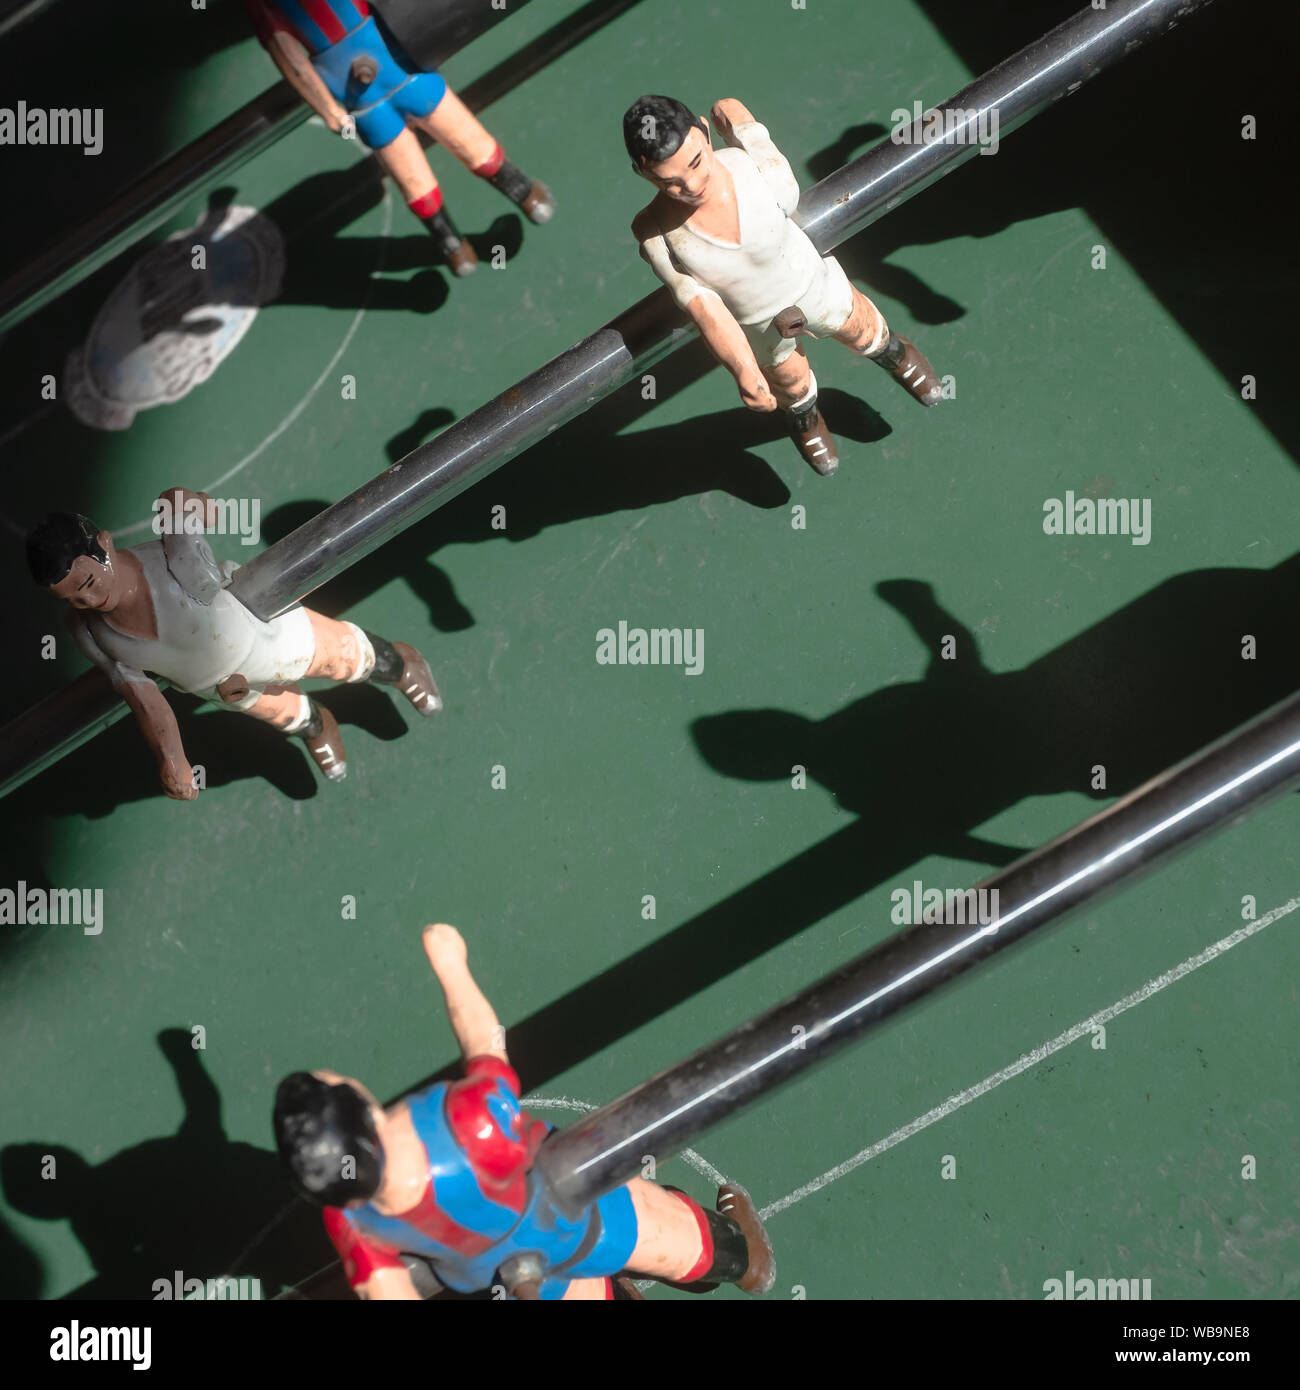 Figurines soccer players on an old foosball table. Directly above view. Rivalry and teamwork concepts. Stock Photo